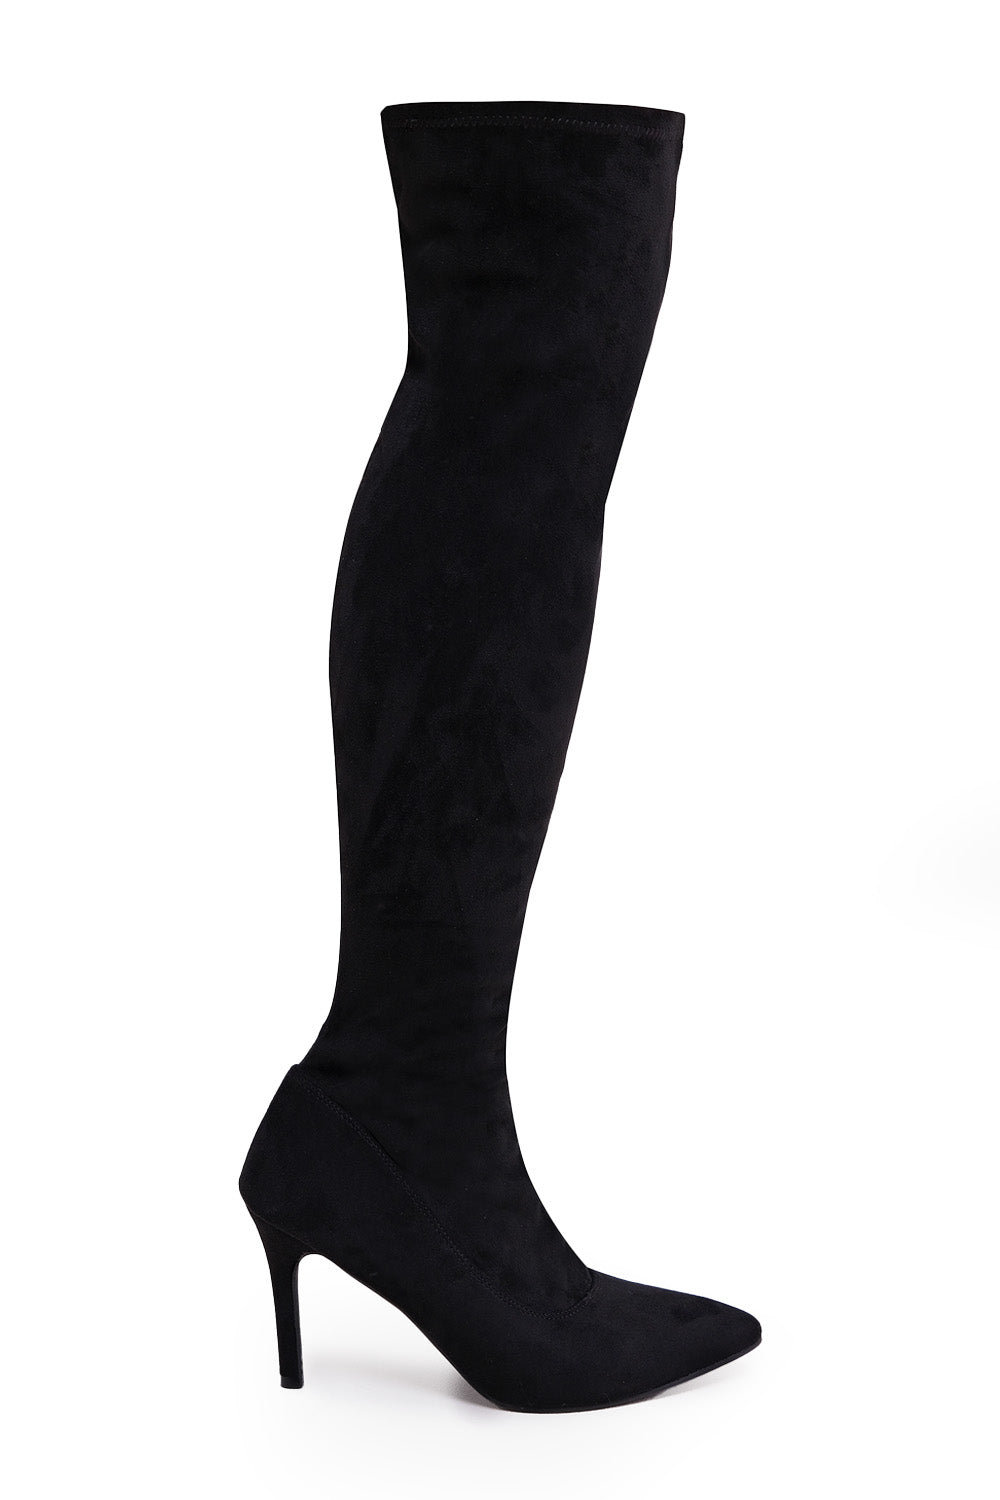 LEXI OVER THE KNEE BOOTS WITH STILETTO HEELS IN BLACK SUEDE